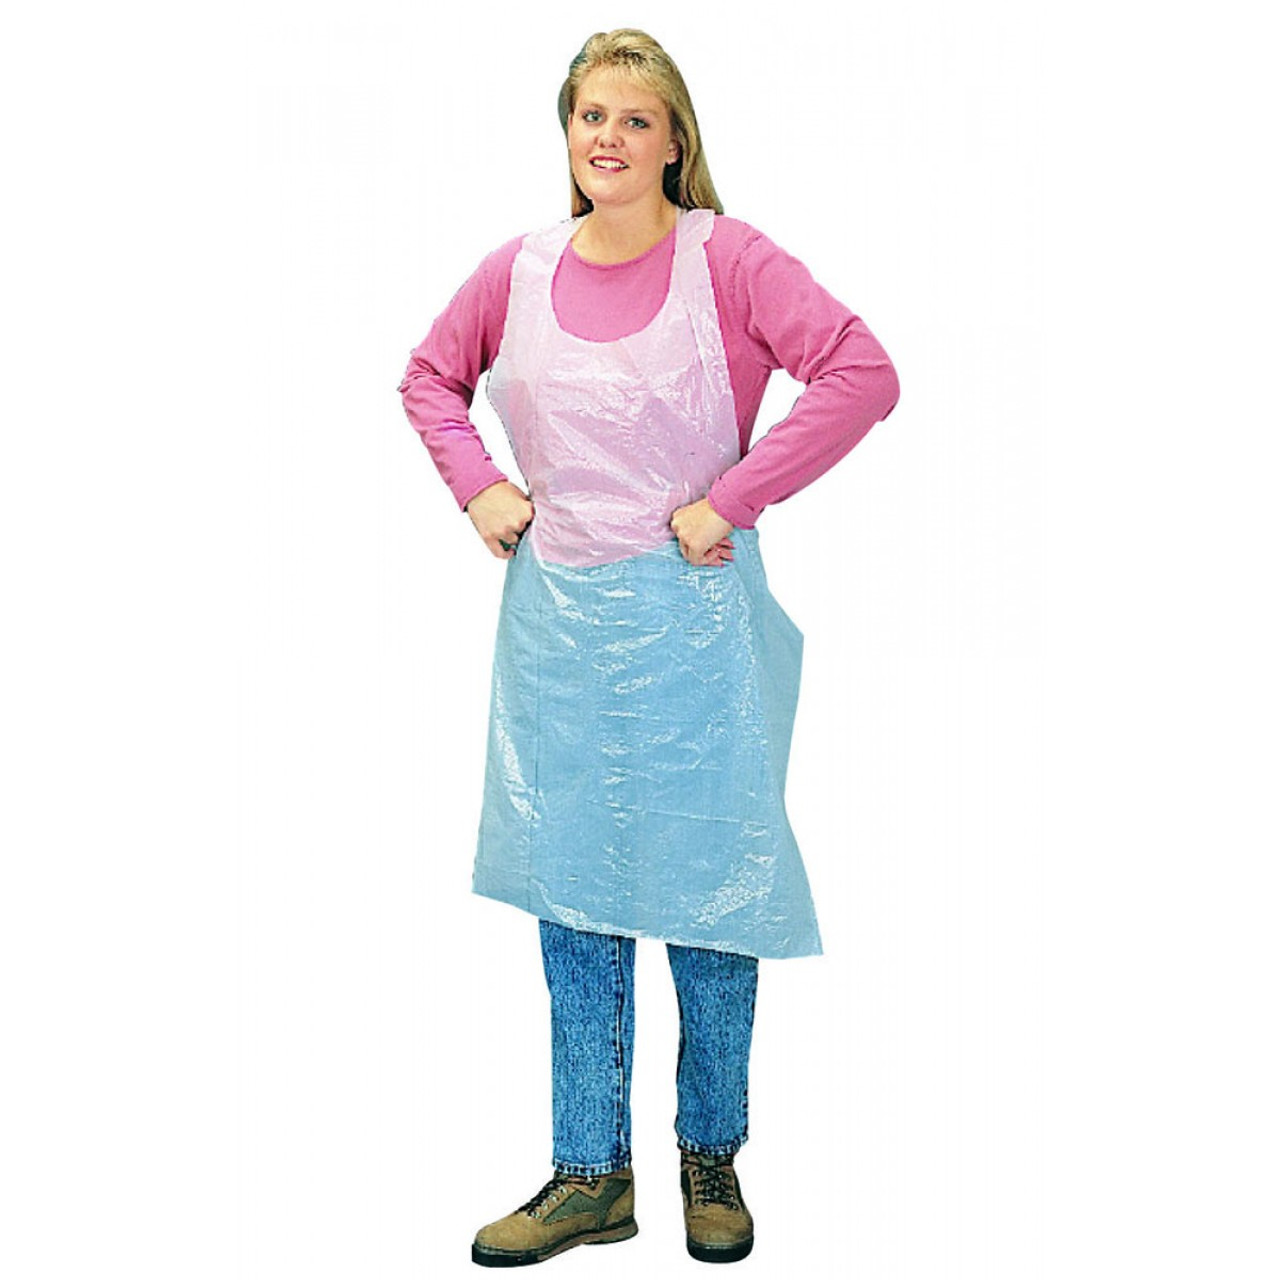 White 28x46 Aprons, White Polyethylene, 1.25 mil, Embossed, 28in.46in.  Disposable Aprons 1 Case 200-06002